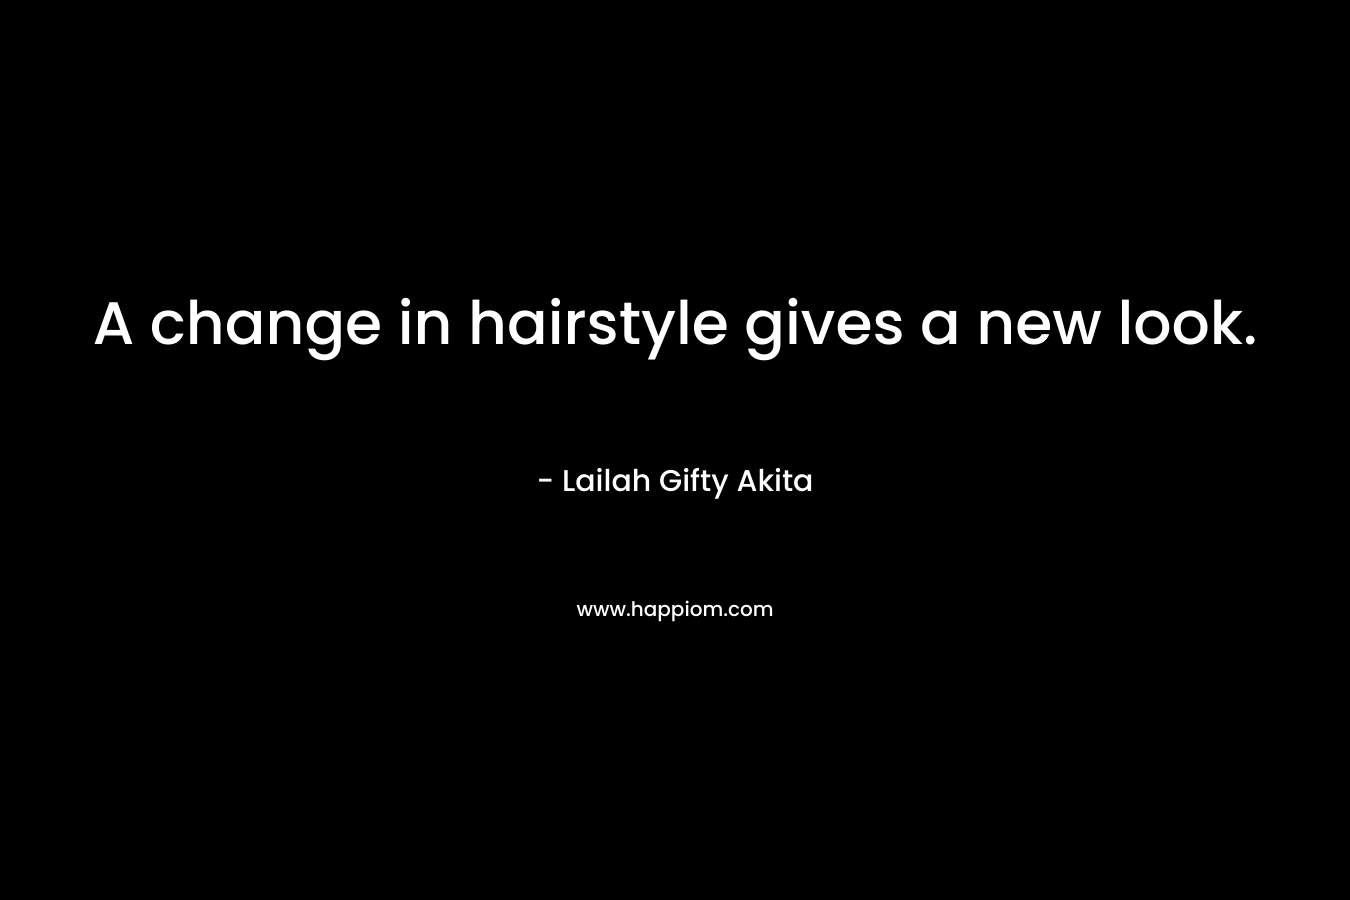 A change in hairstyle gives a new look. – Lailah Gifty Akita